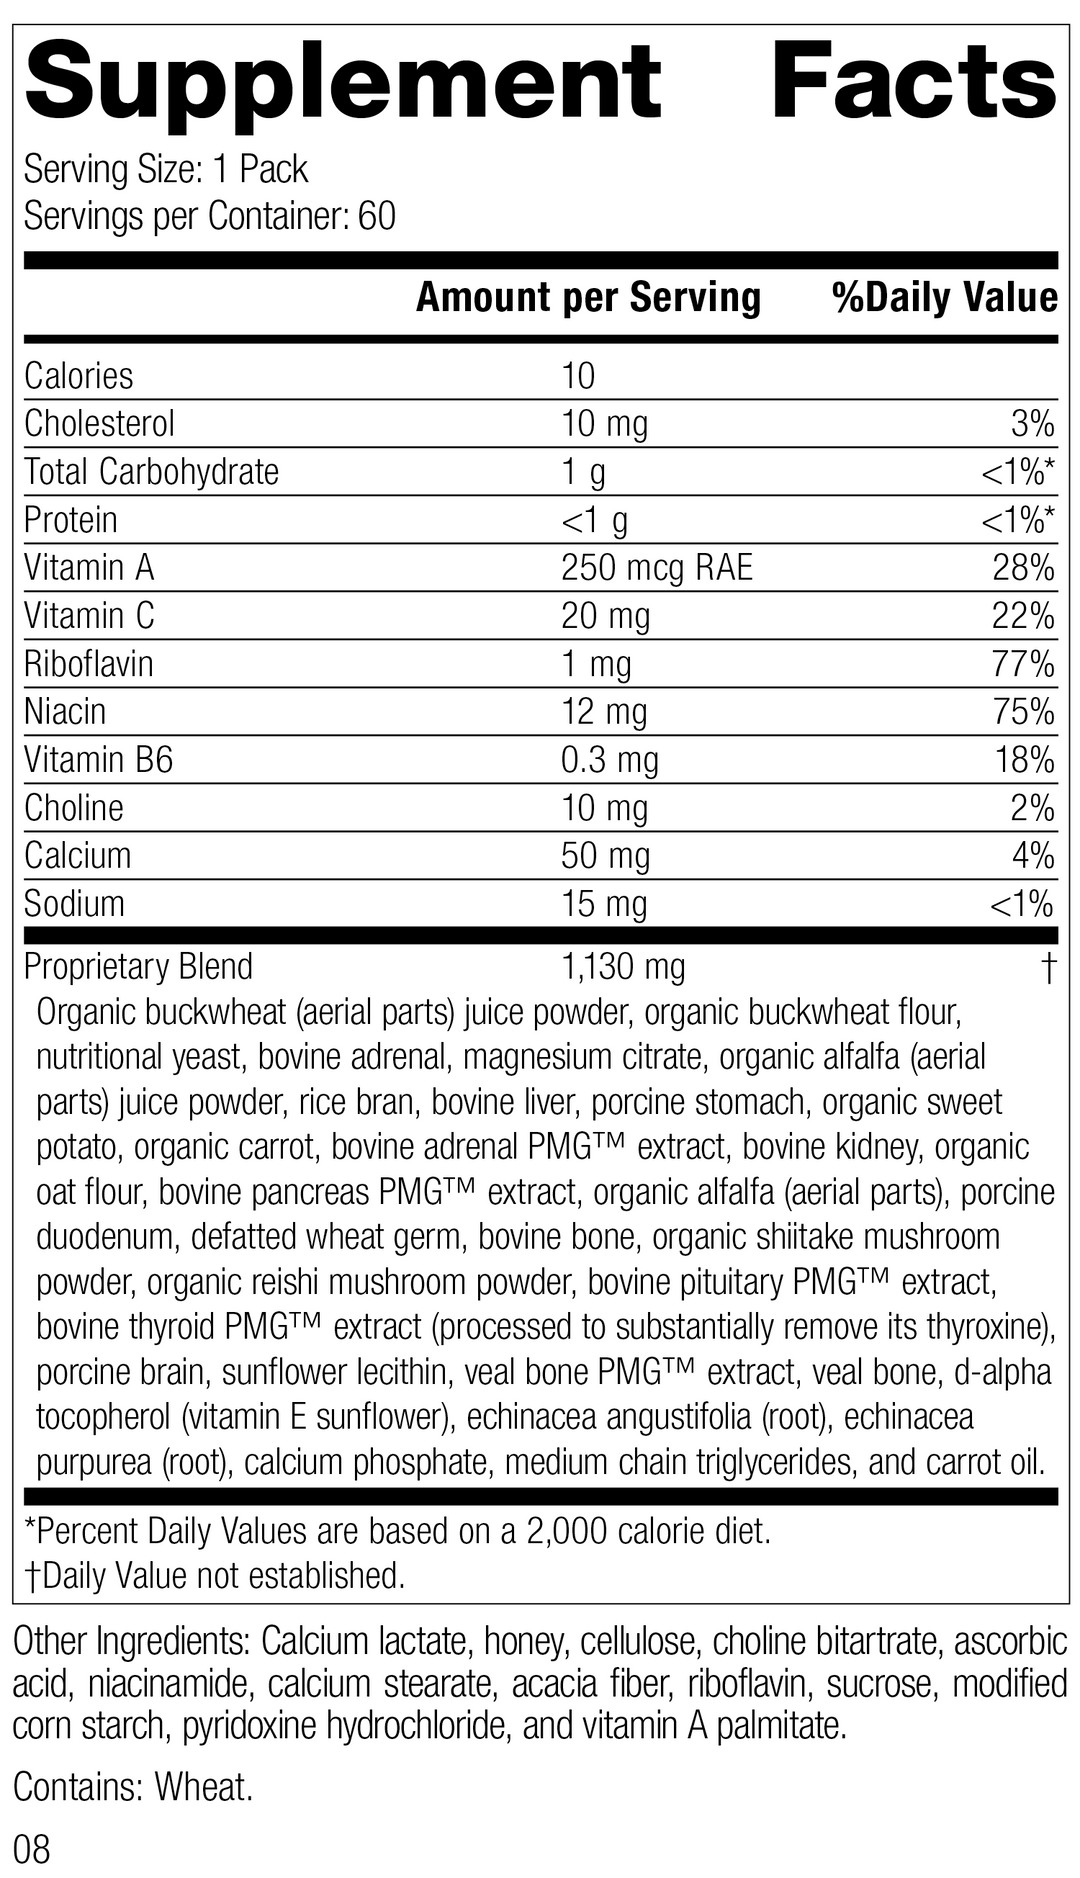 Adrenal Health Pack, Rev 08 Supplement Facts